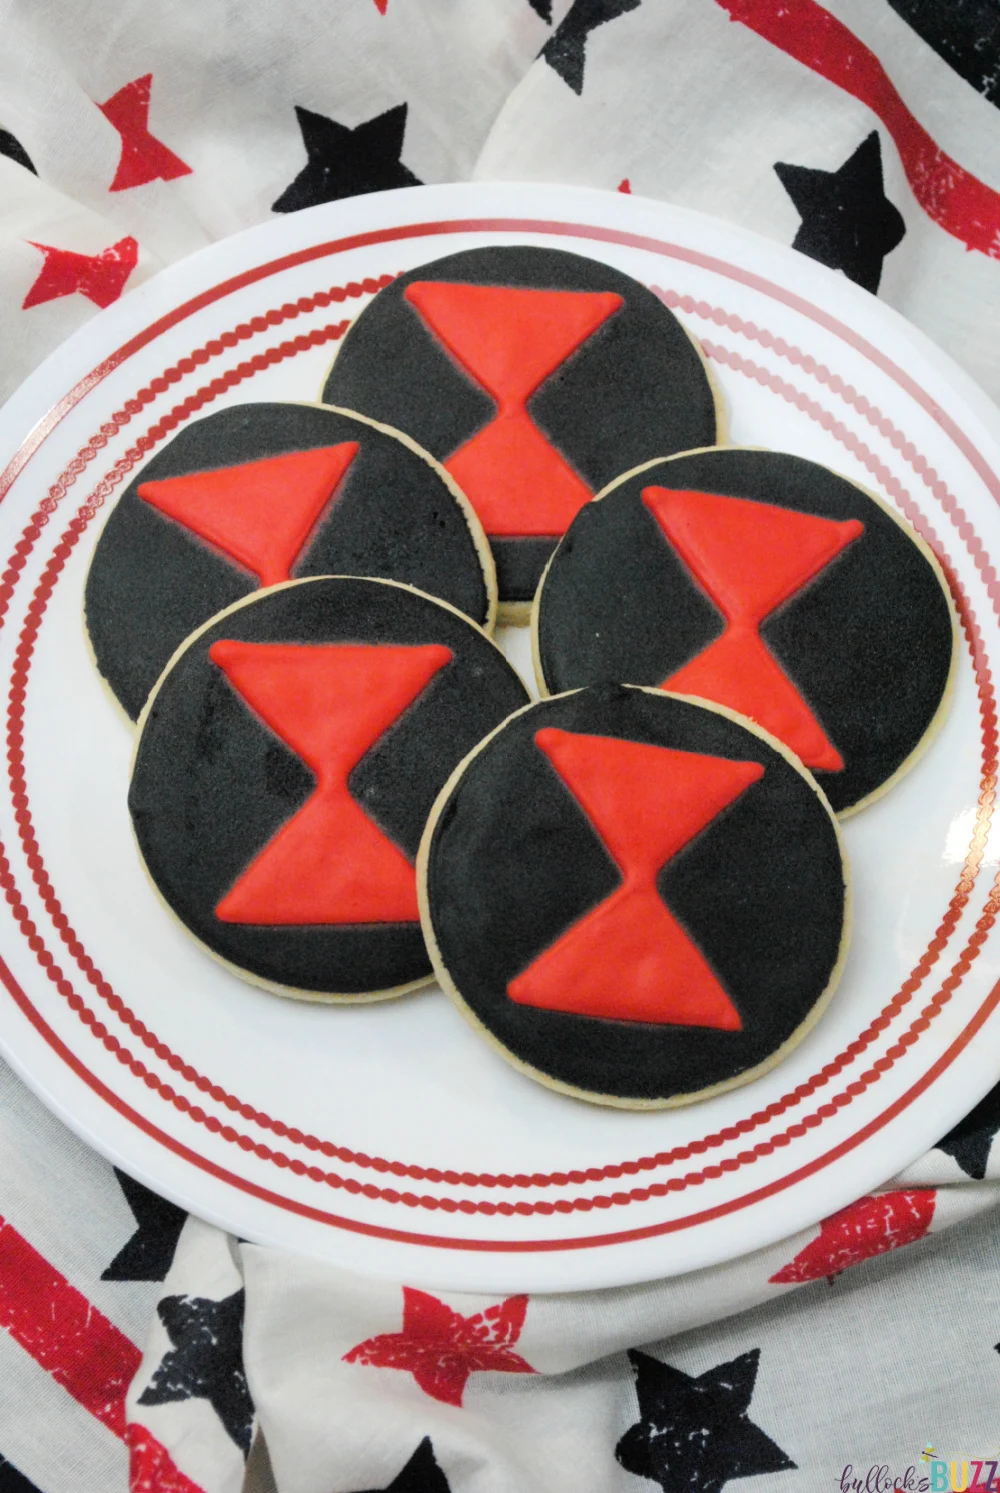 Five Avengers Black Widow Cookies on white plate with red trim.